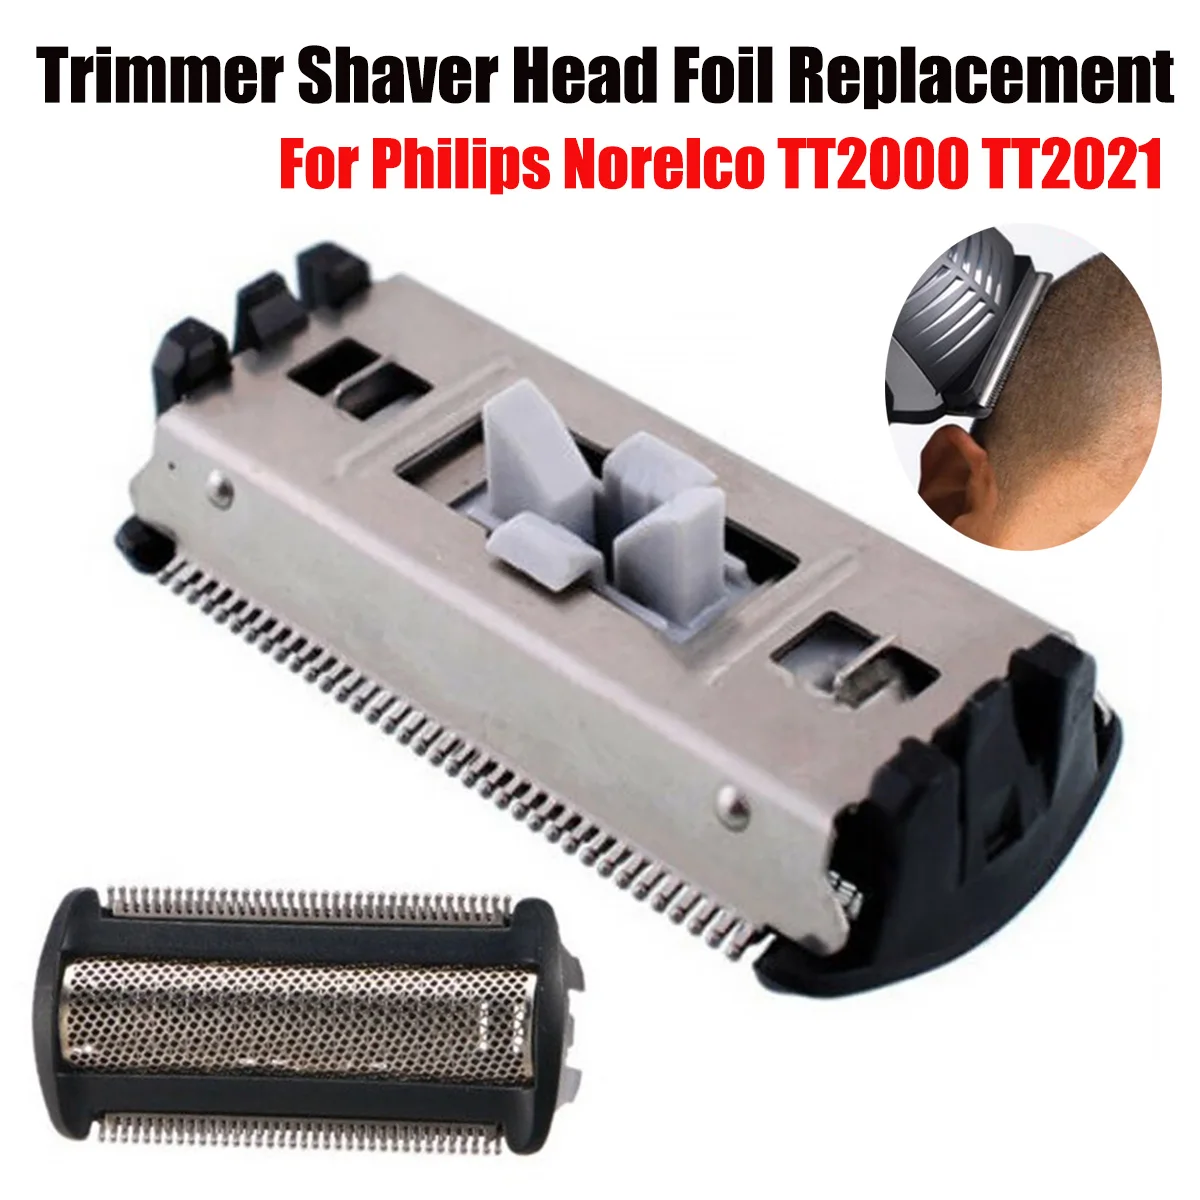 accessories of philips trimmer